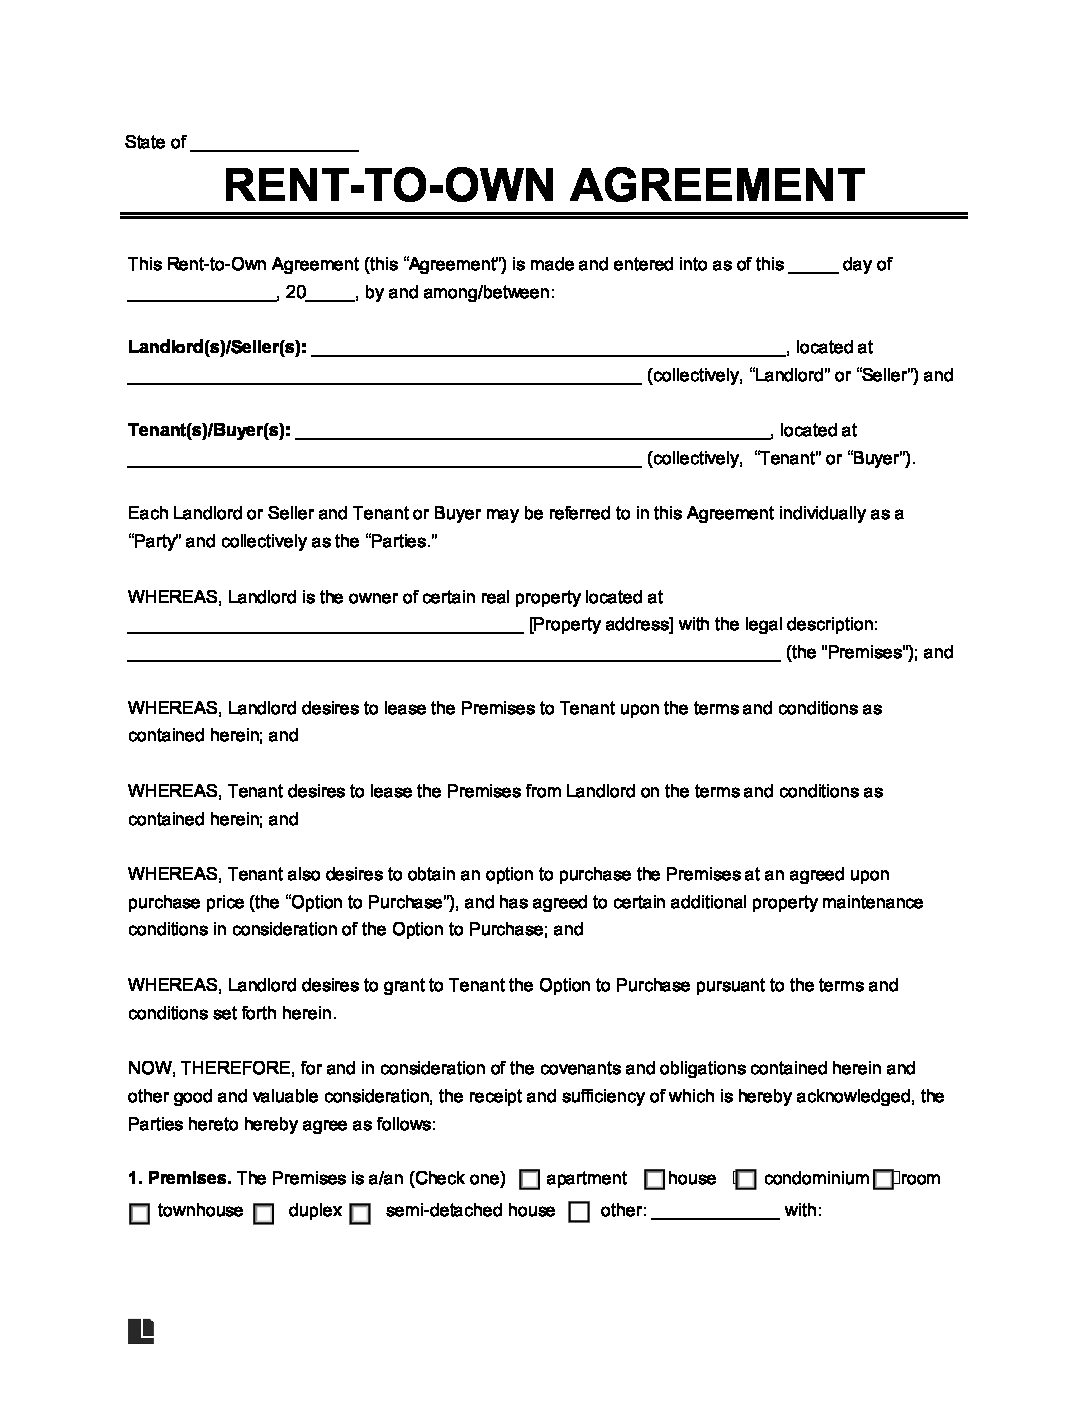 Can You Make Your Own Lease Agreement Printable Form, Templates and